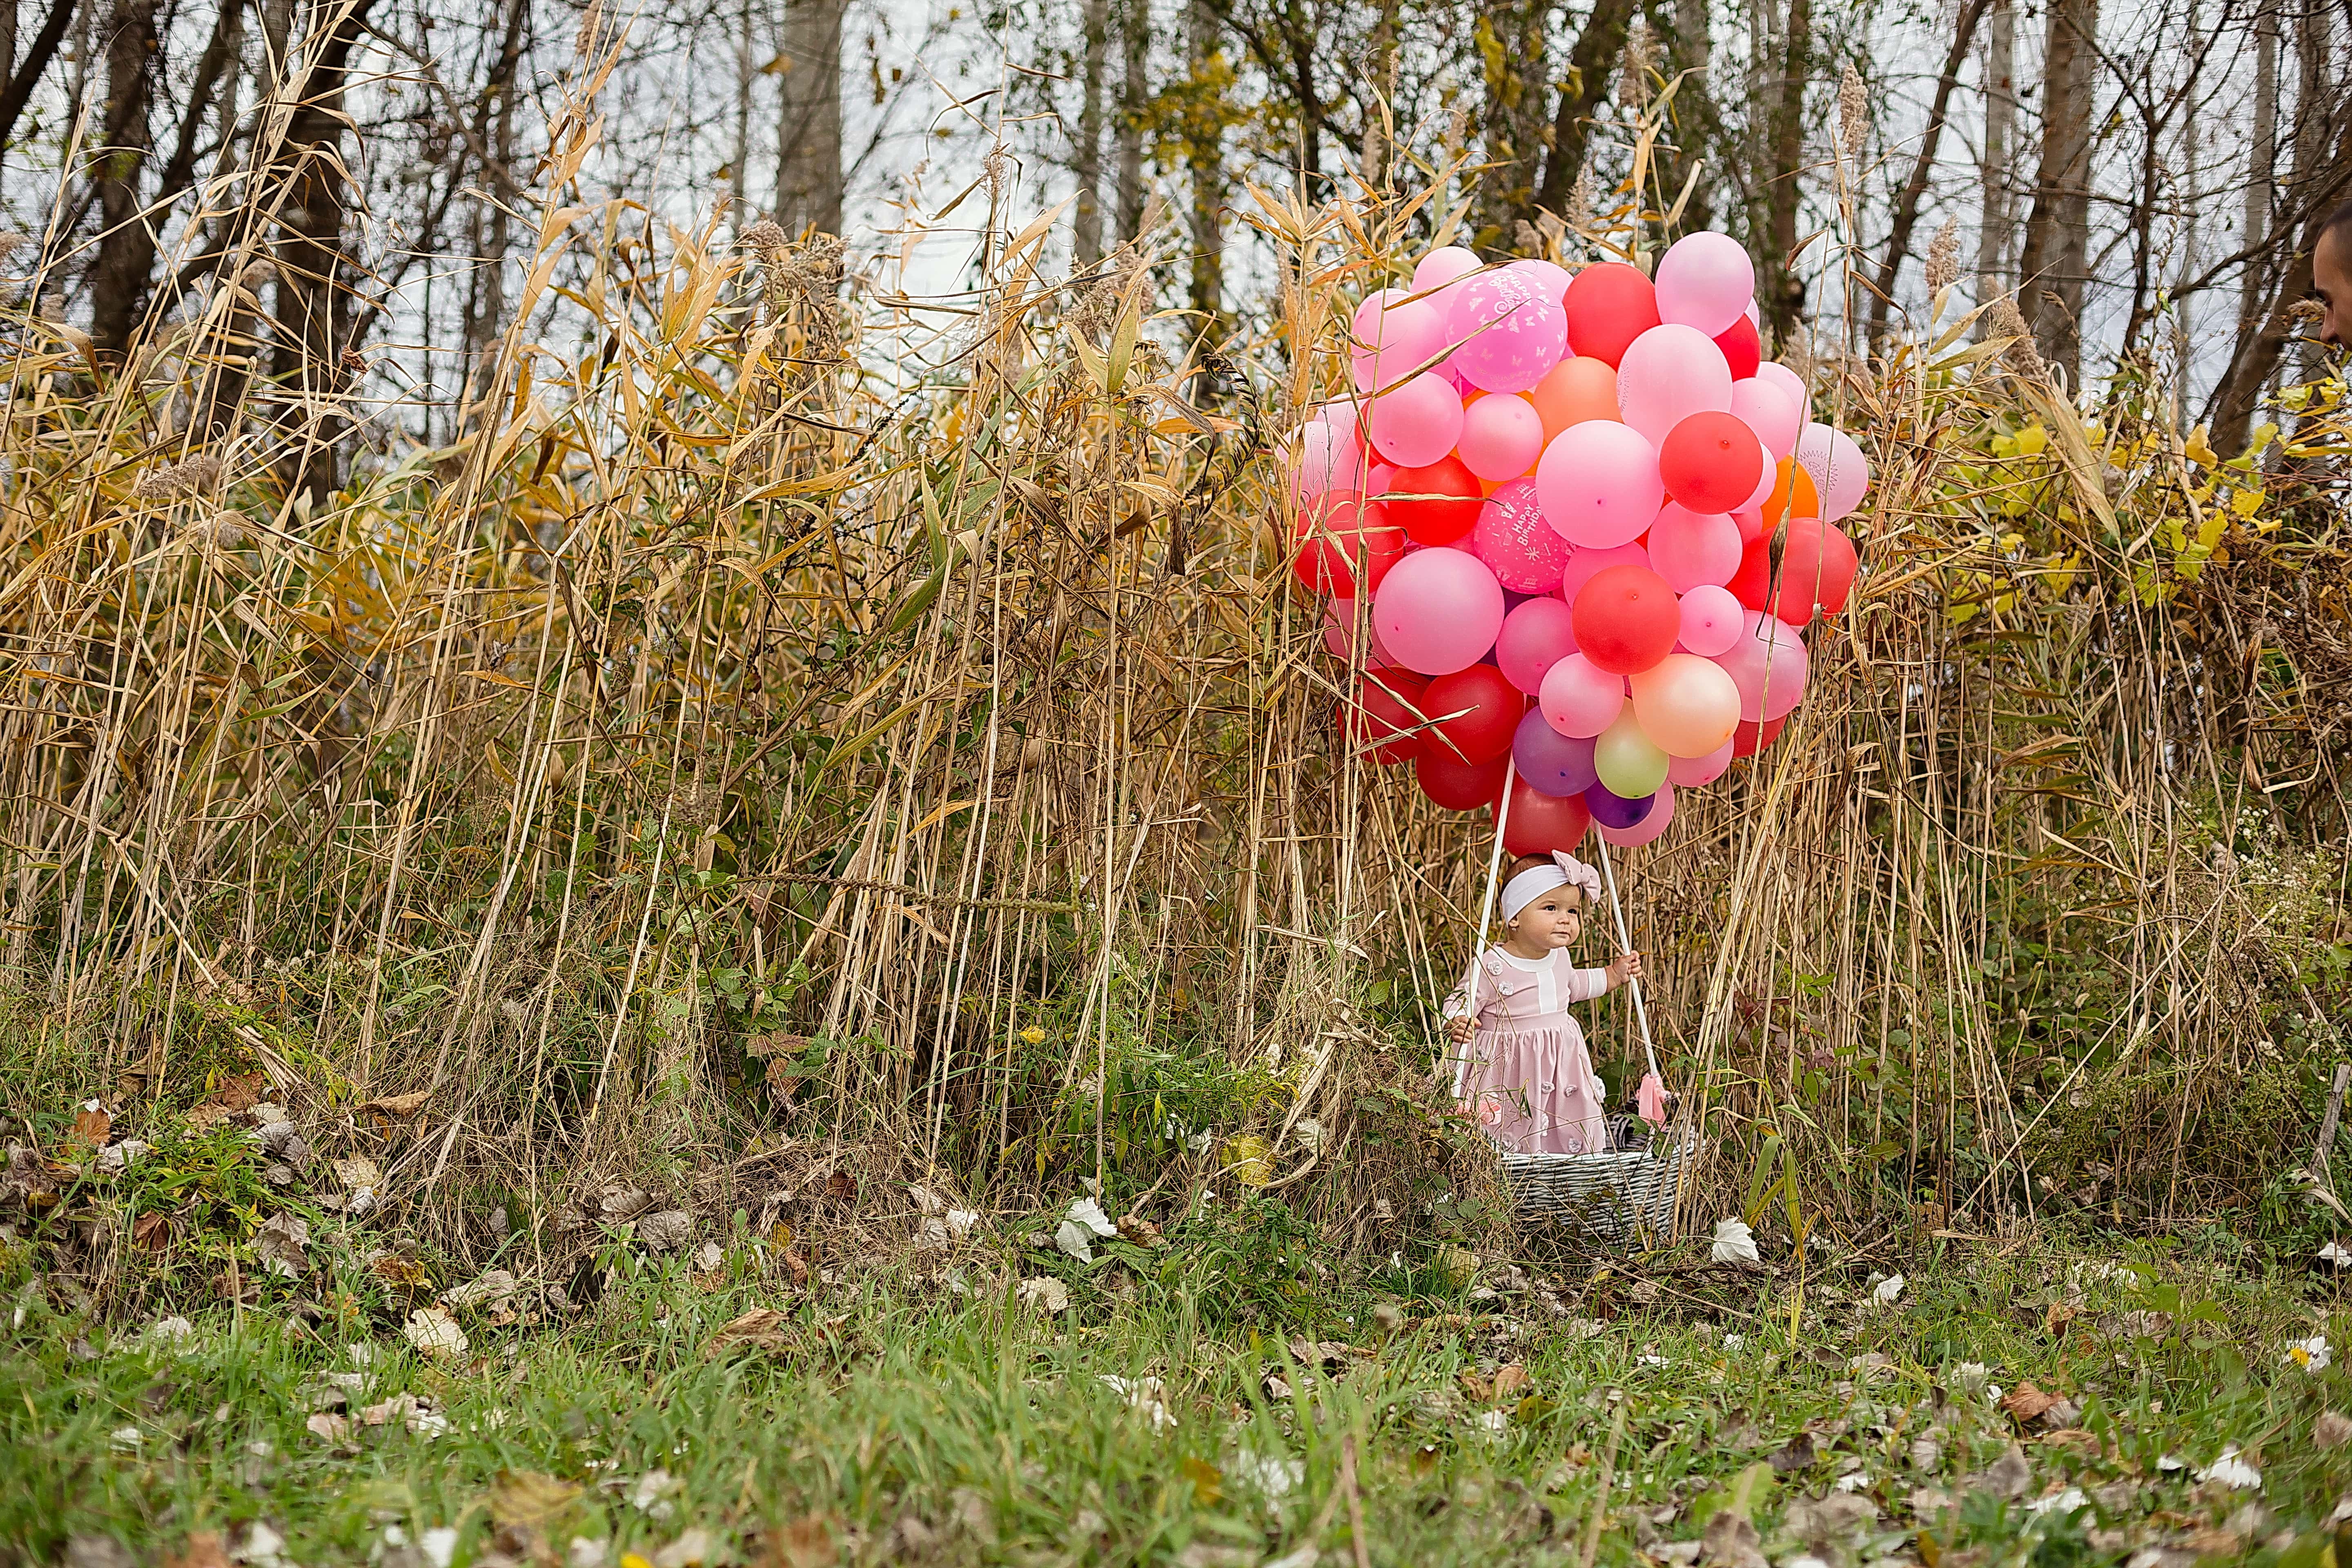 Free picture: baby, balloon, toddler, wicker basket, adorable, young ...